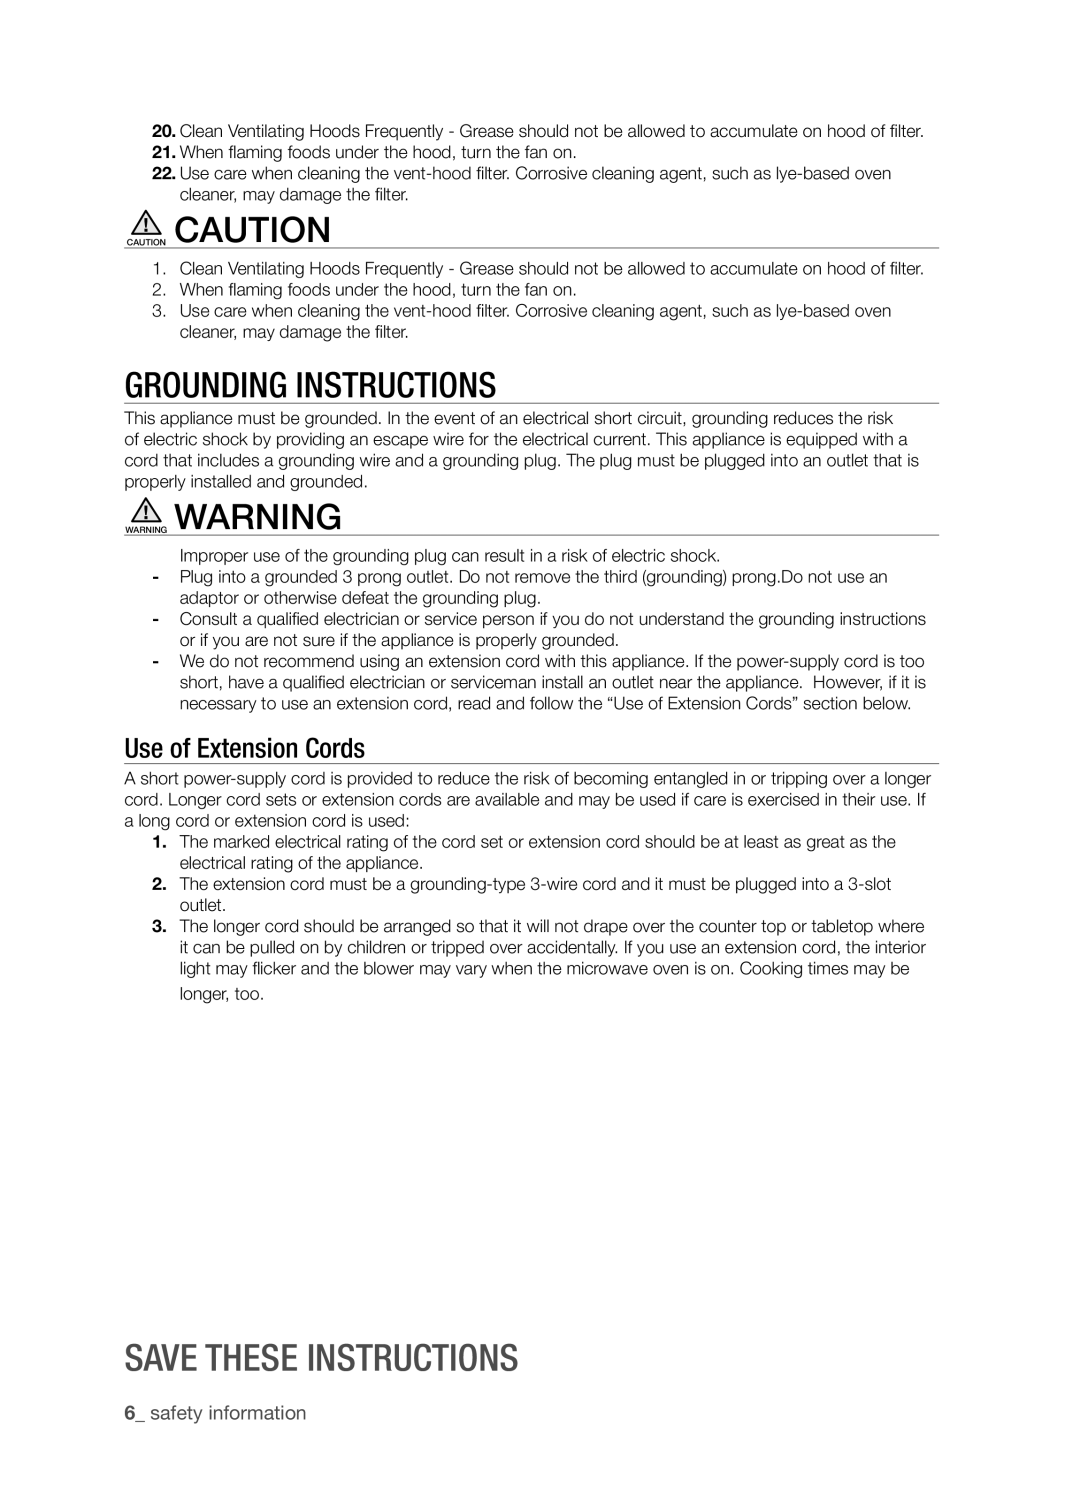 Samsung SMH8165STG user manual Grounding Instructions, Save these instructions, Use of Extension Cords, safety information 